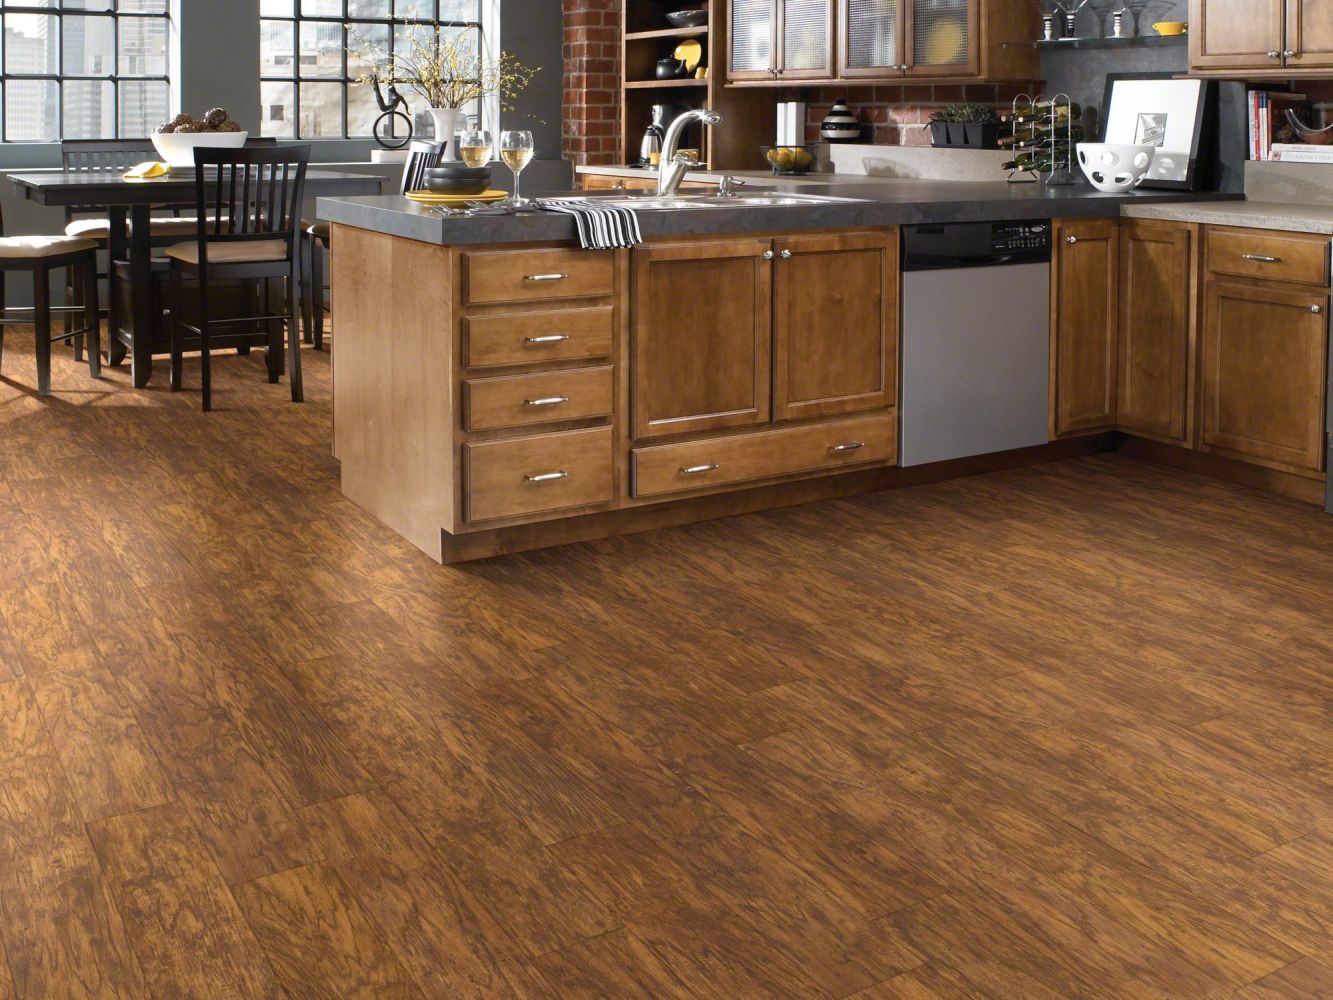 Shaw Floors Resilient Residential Classico Plus Plank Oro 00255_2426V